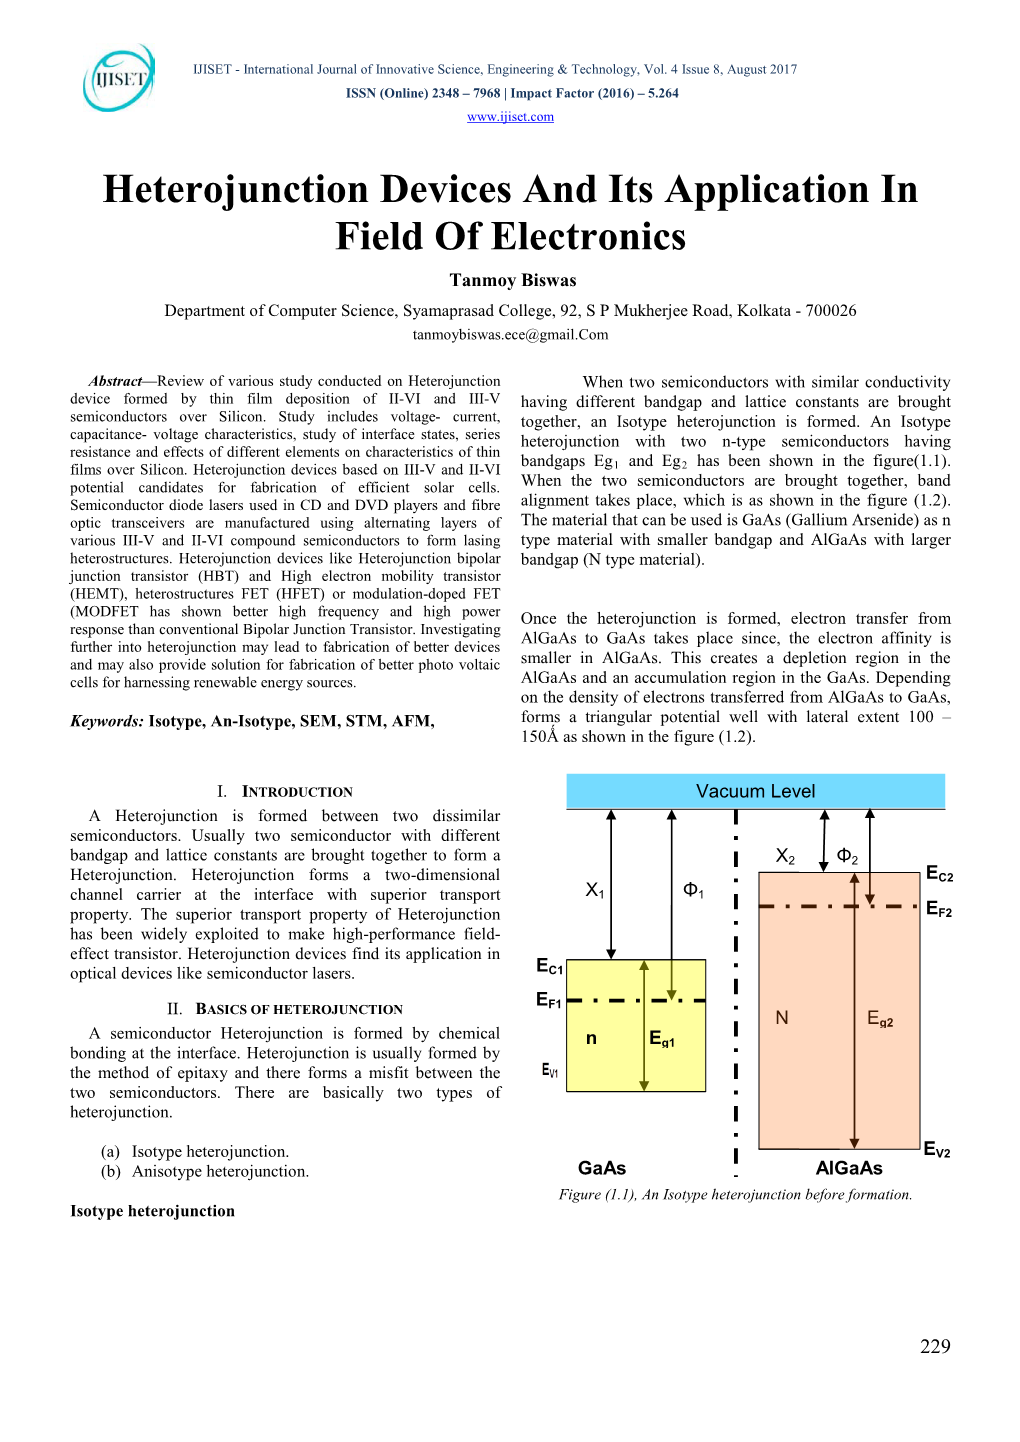 Heterojunction Devices and Its Application in Field of Electronics